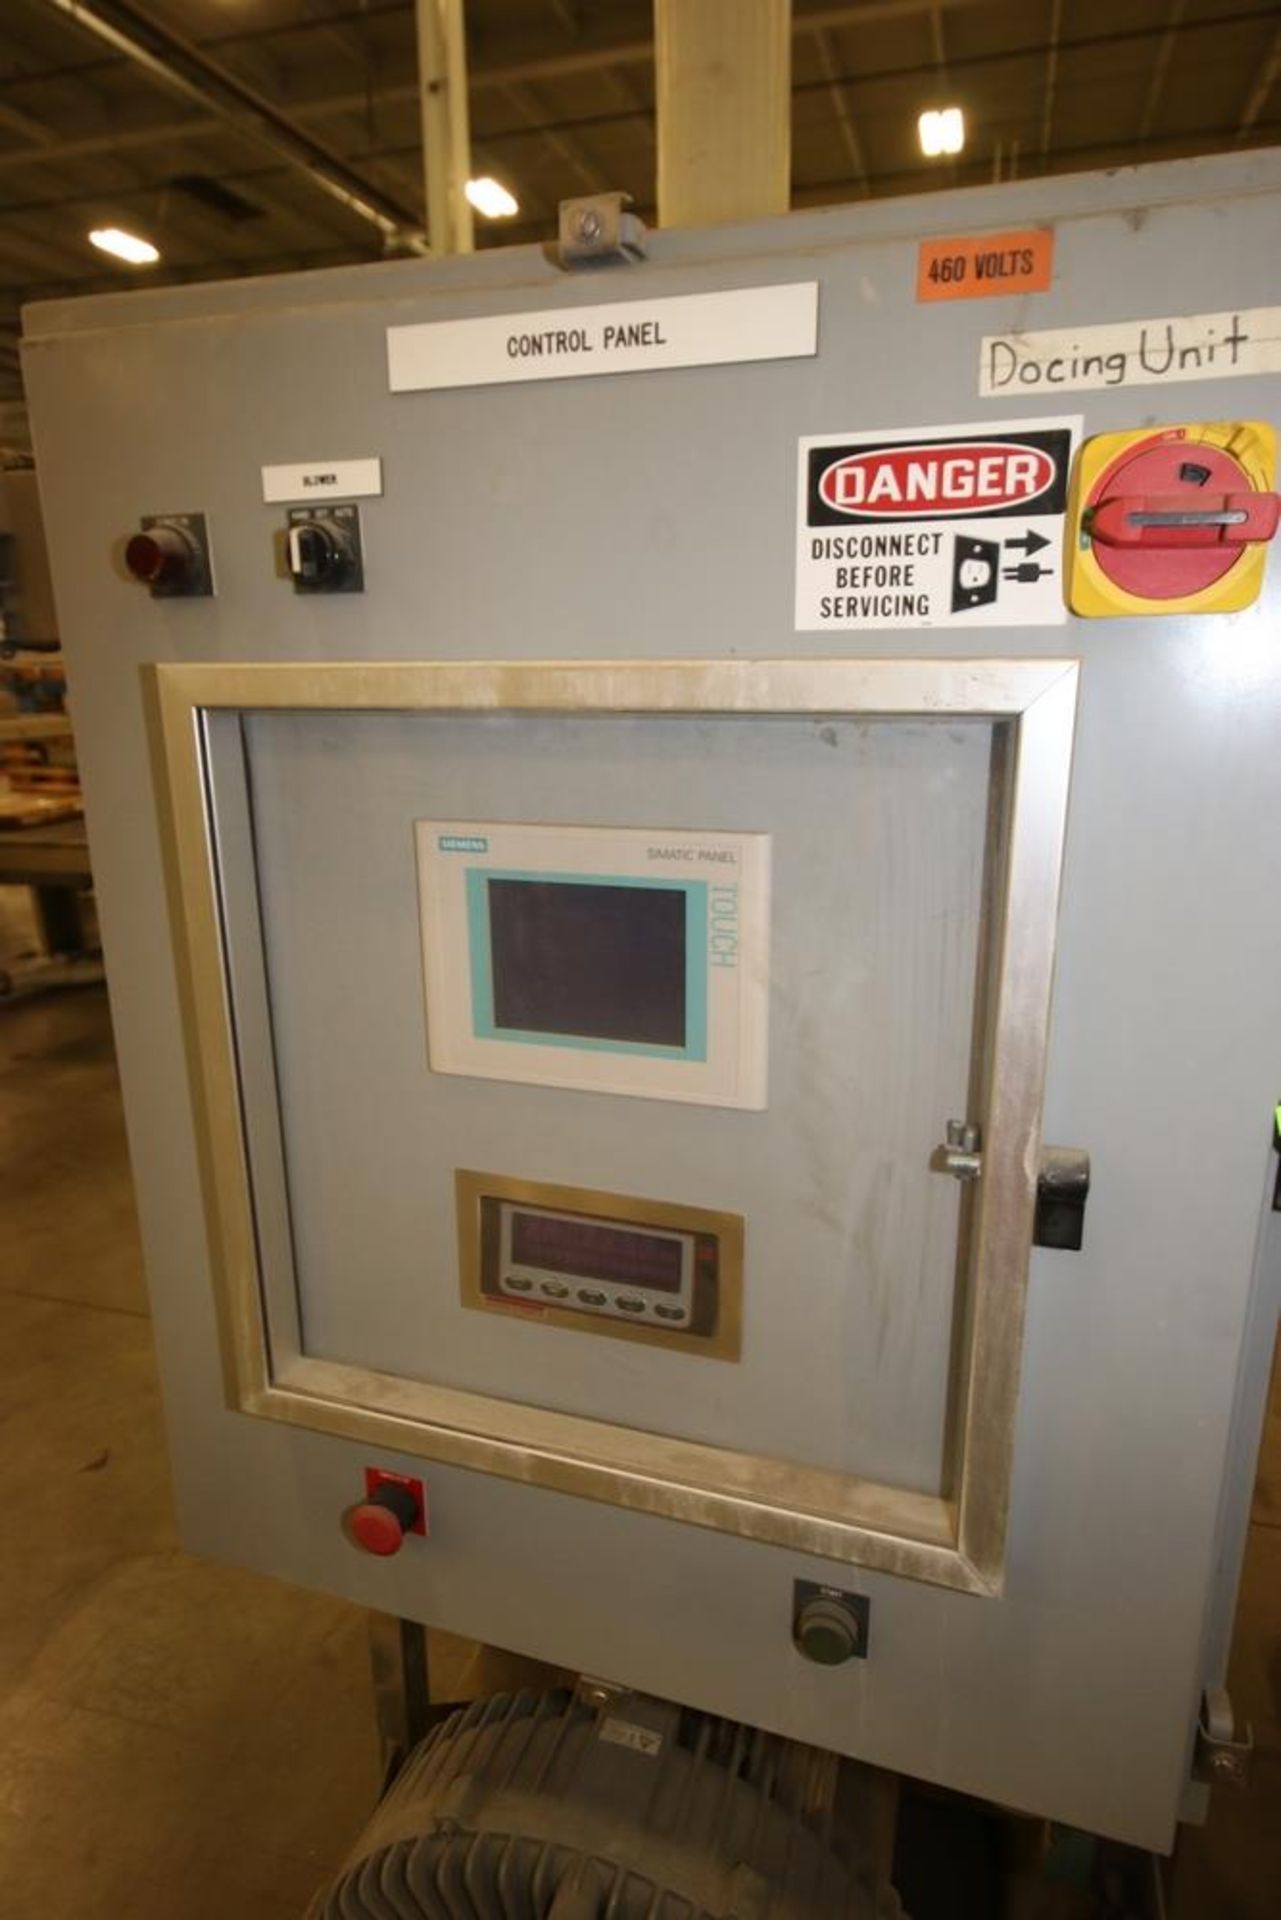 All-Star 20 hp Blower Skid, with Siemens PLC and Touchscreen Display, Mounted on Skid with - Image 4 of 8